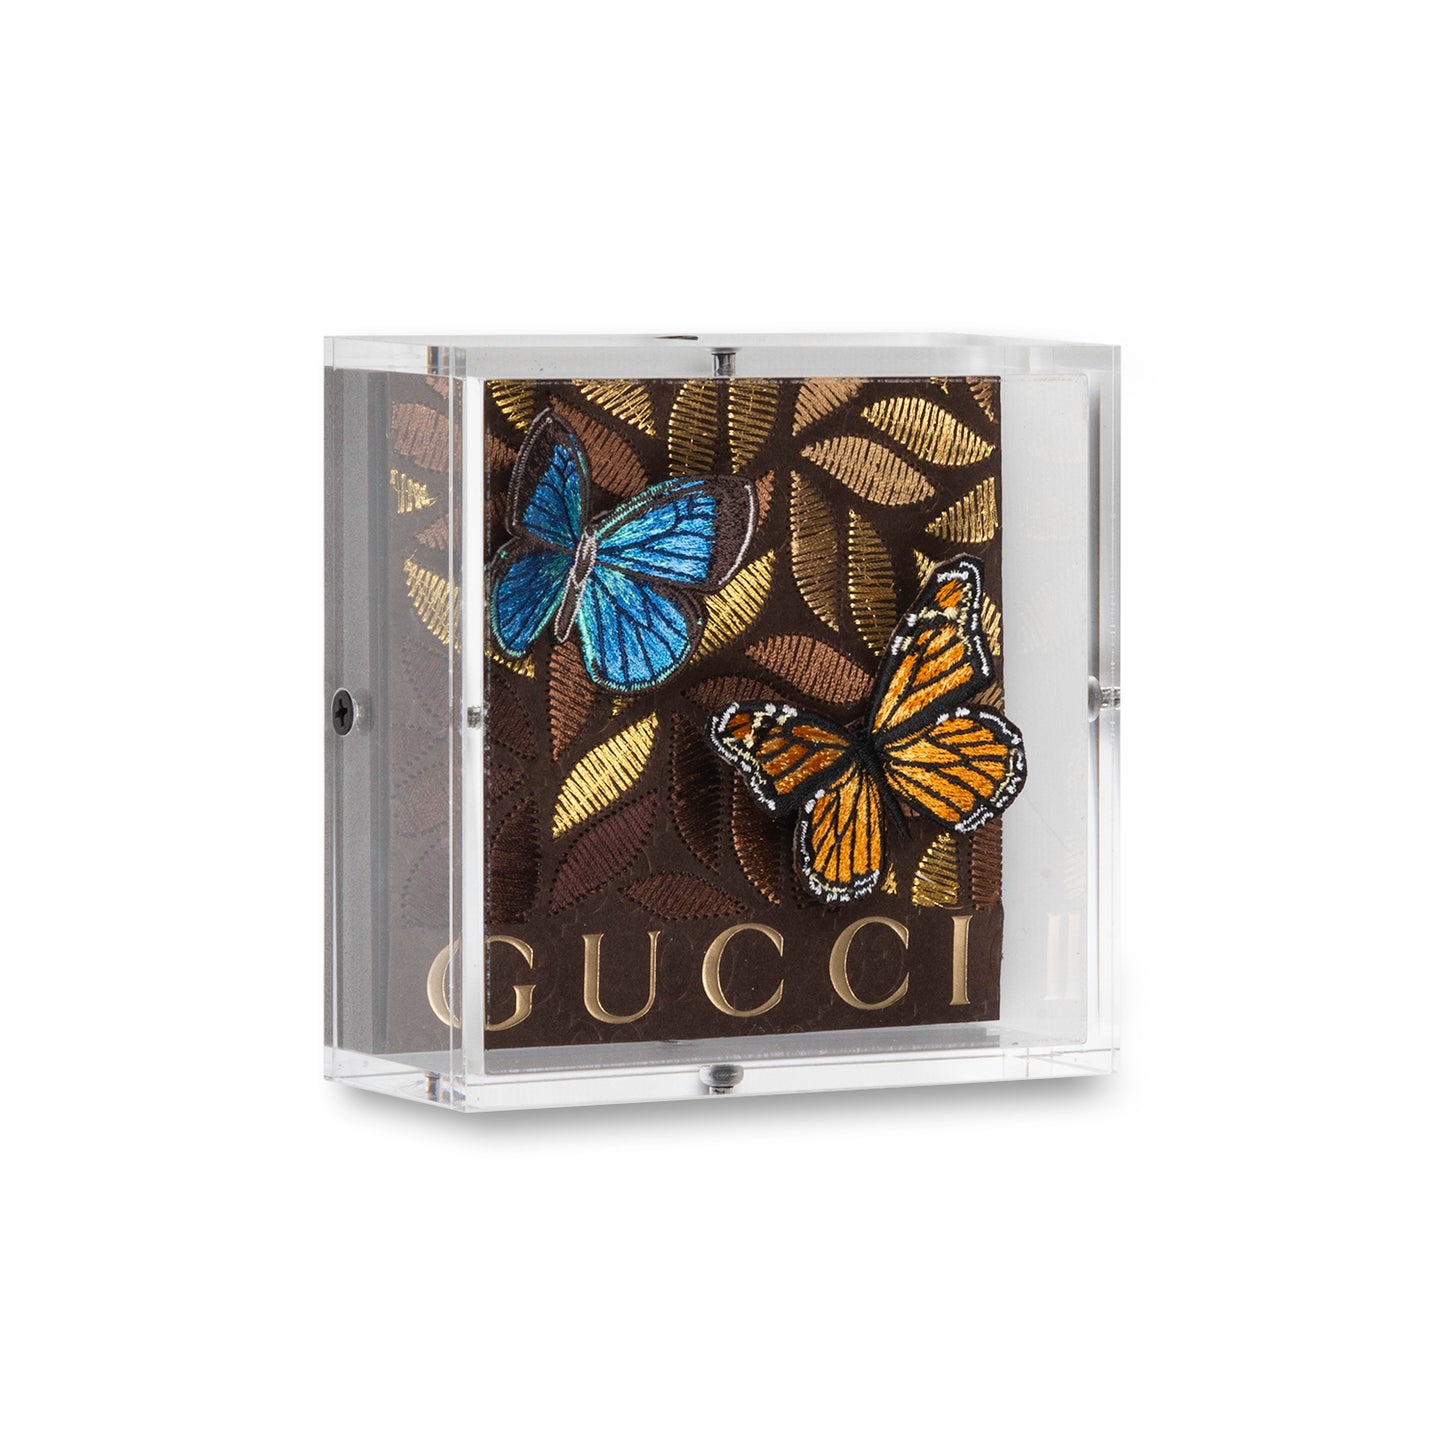 Petite Brown Gucci Floral Petals by Stephen Wilson (5x5x2")